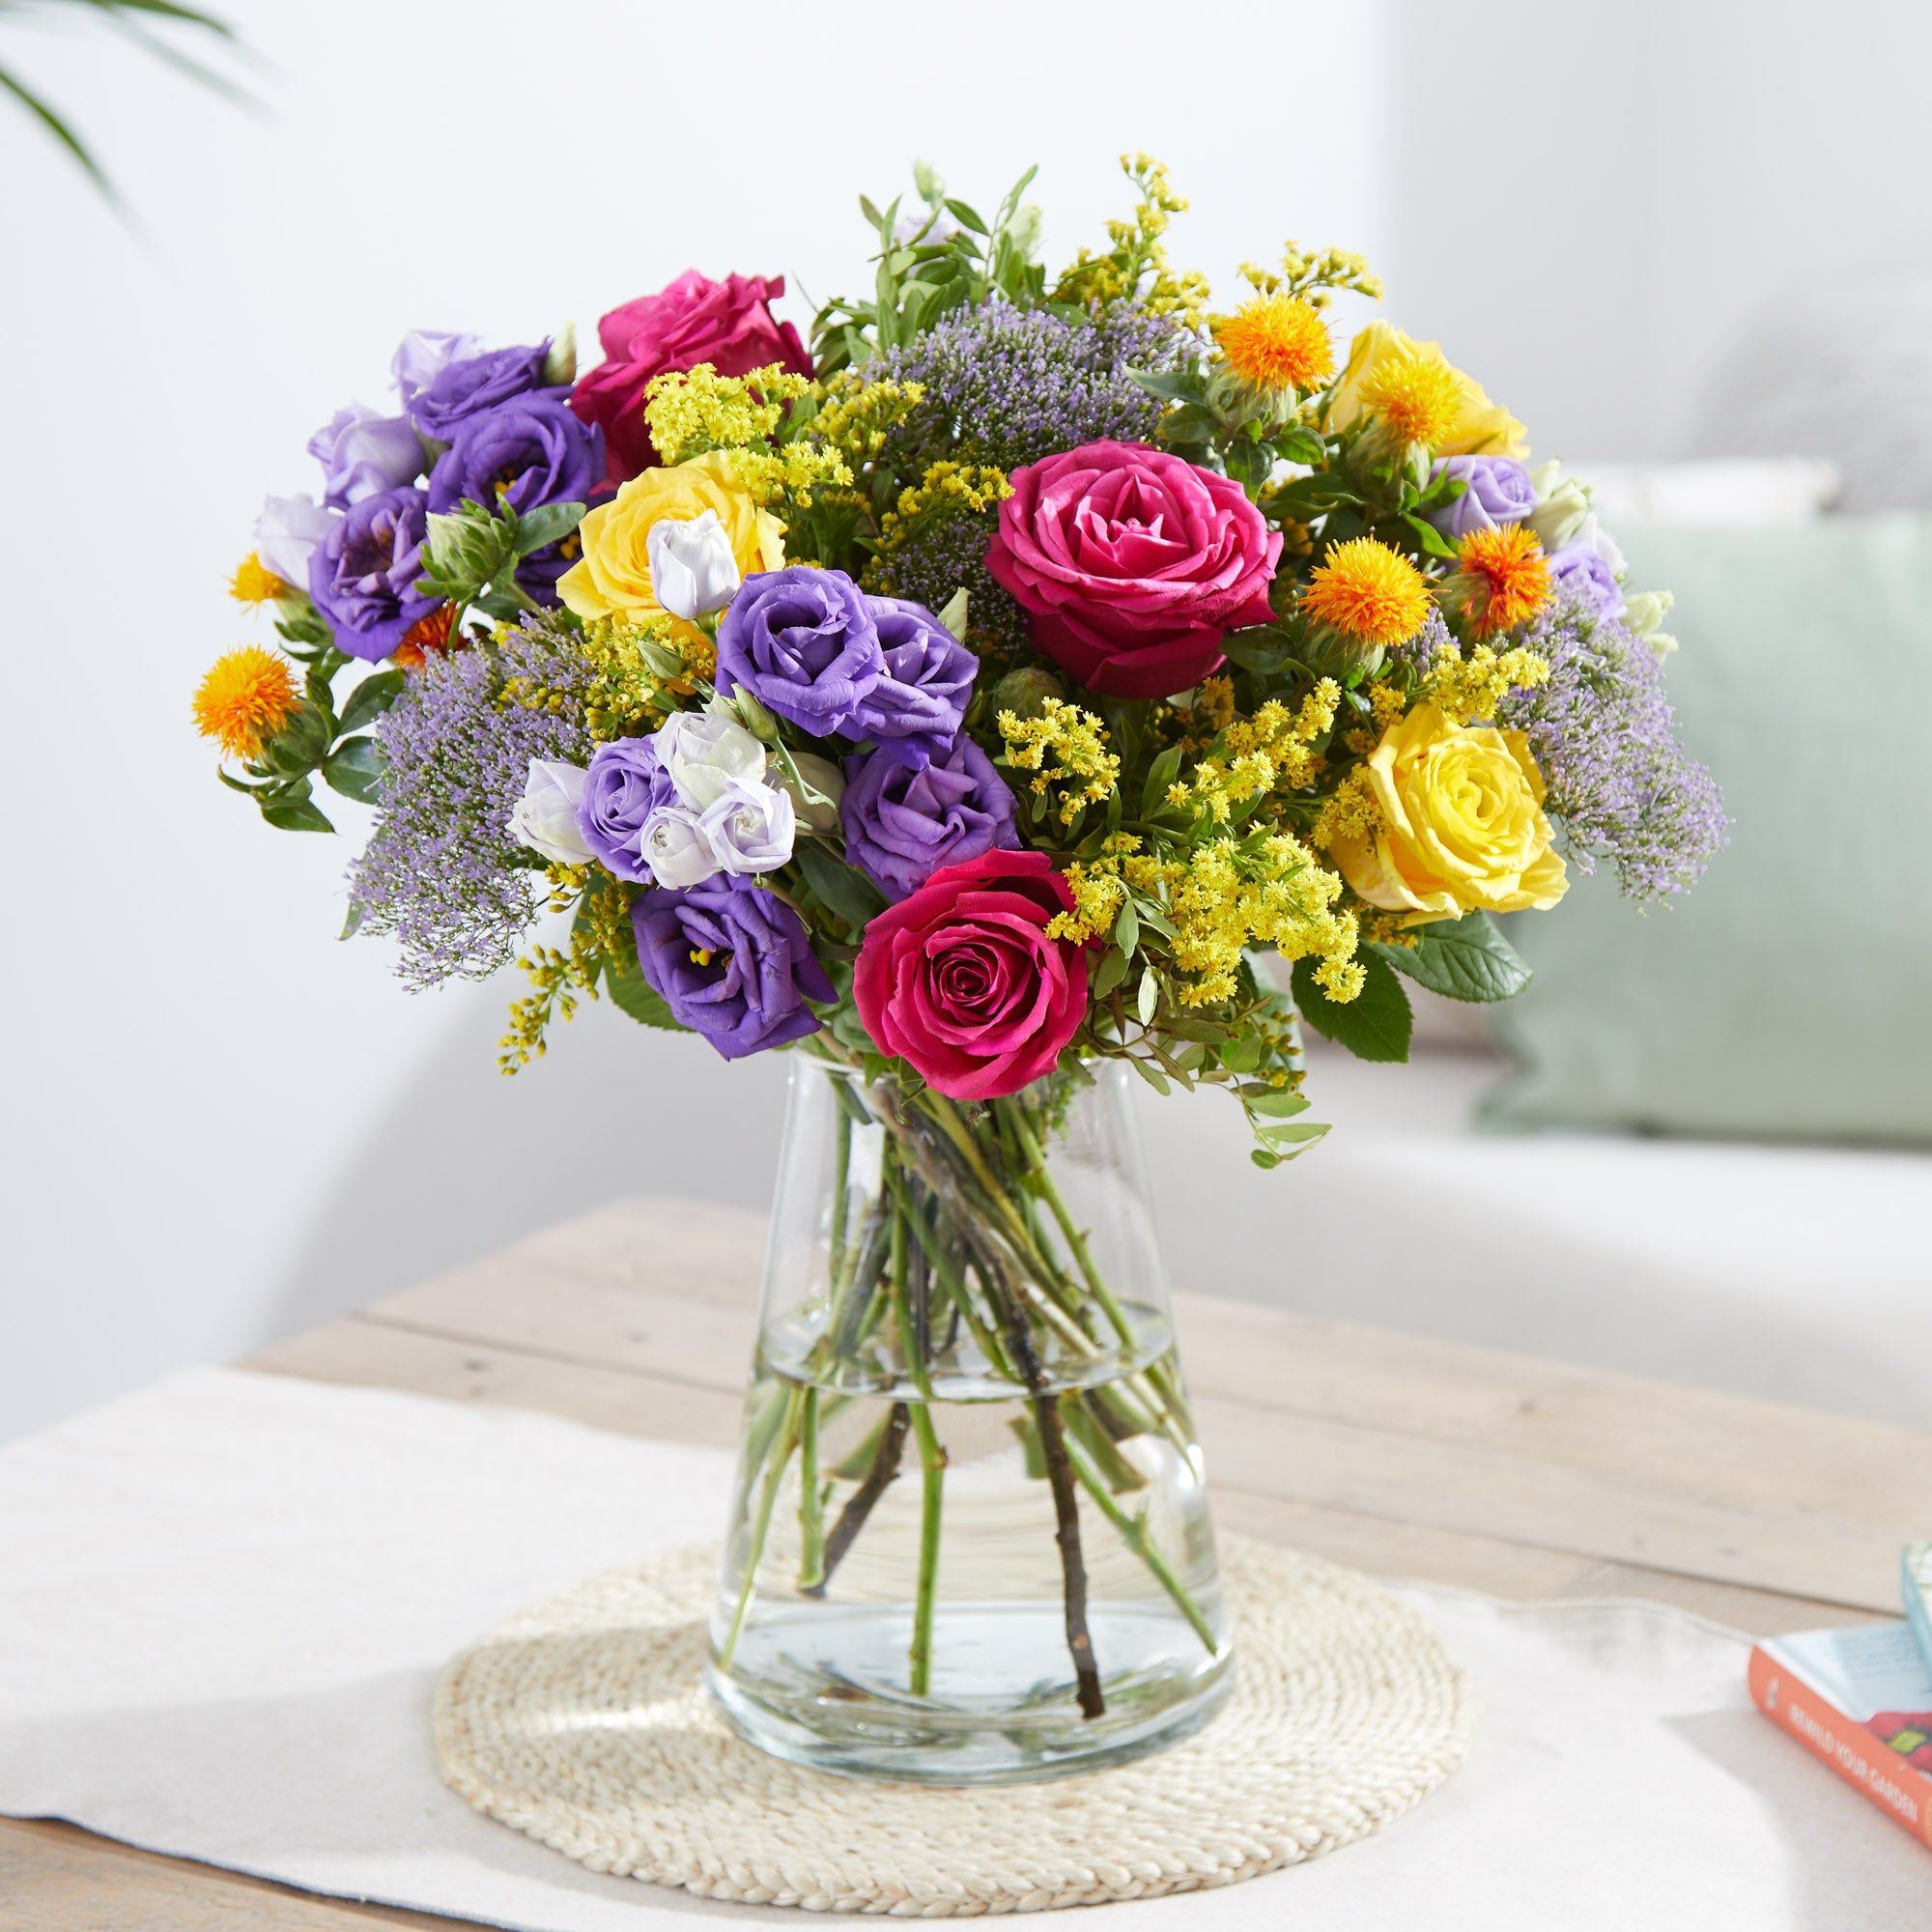 Send the 'Jubilation' bright and colourful ethical bouquet | Arena Flowers